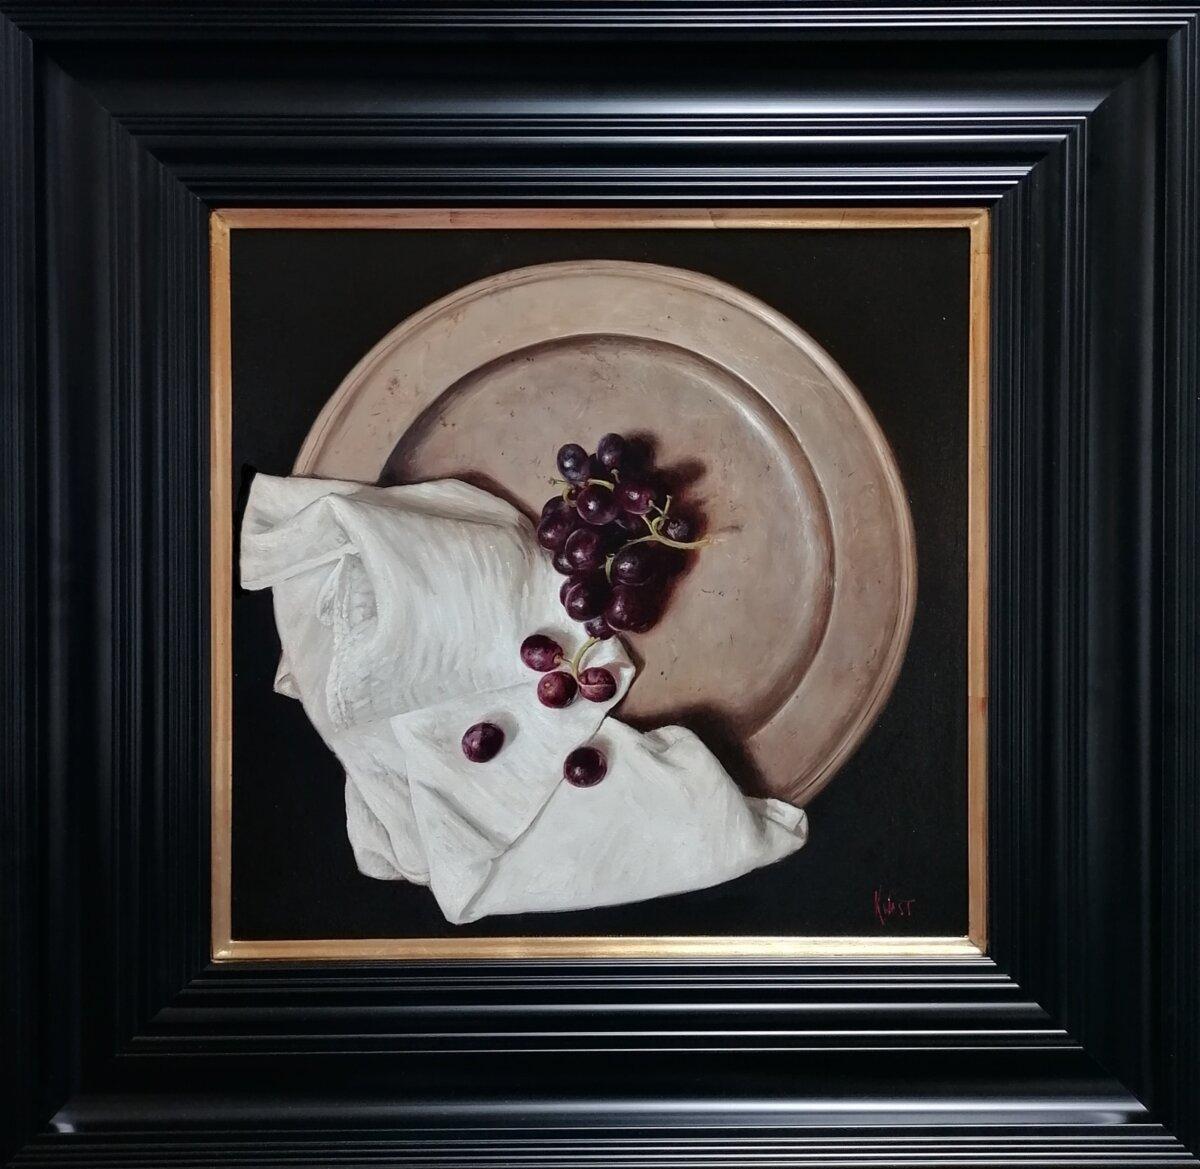 “Still Life With Grapes,” 2022, by Nard Kwast. Oil on linen; 15 3/4 inches by 15 3/4 inches. (Courtesy of Nard Kwast)